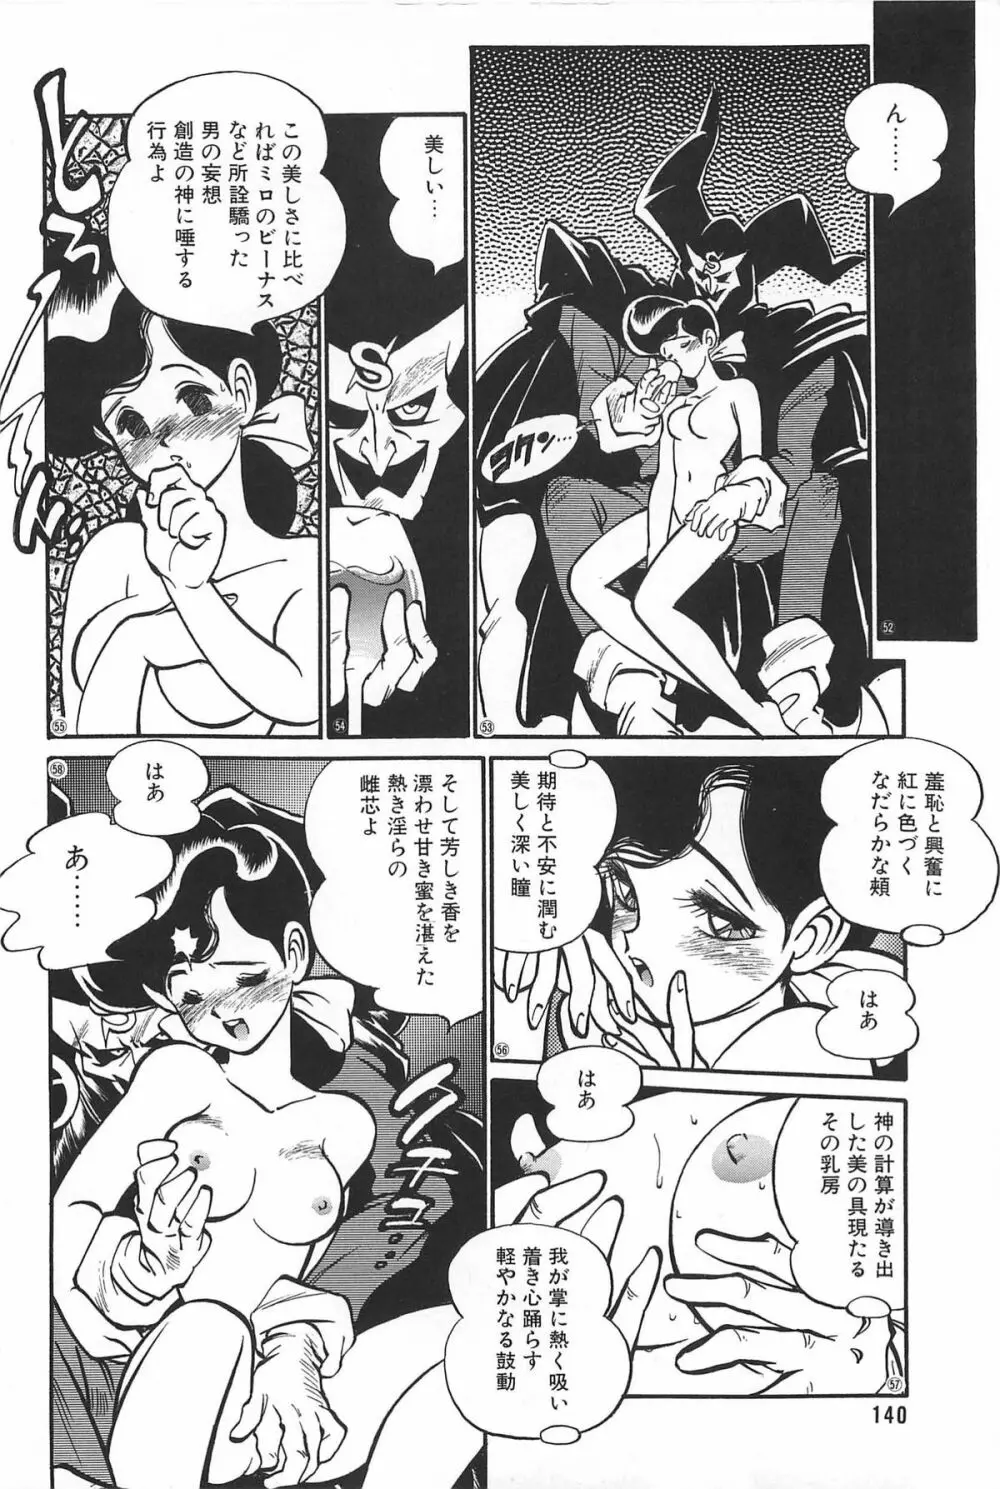 LOVE ME 1995 Page.142